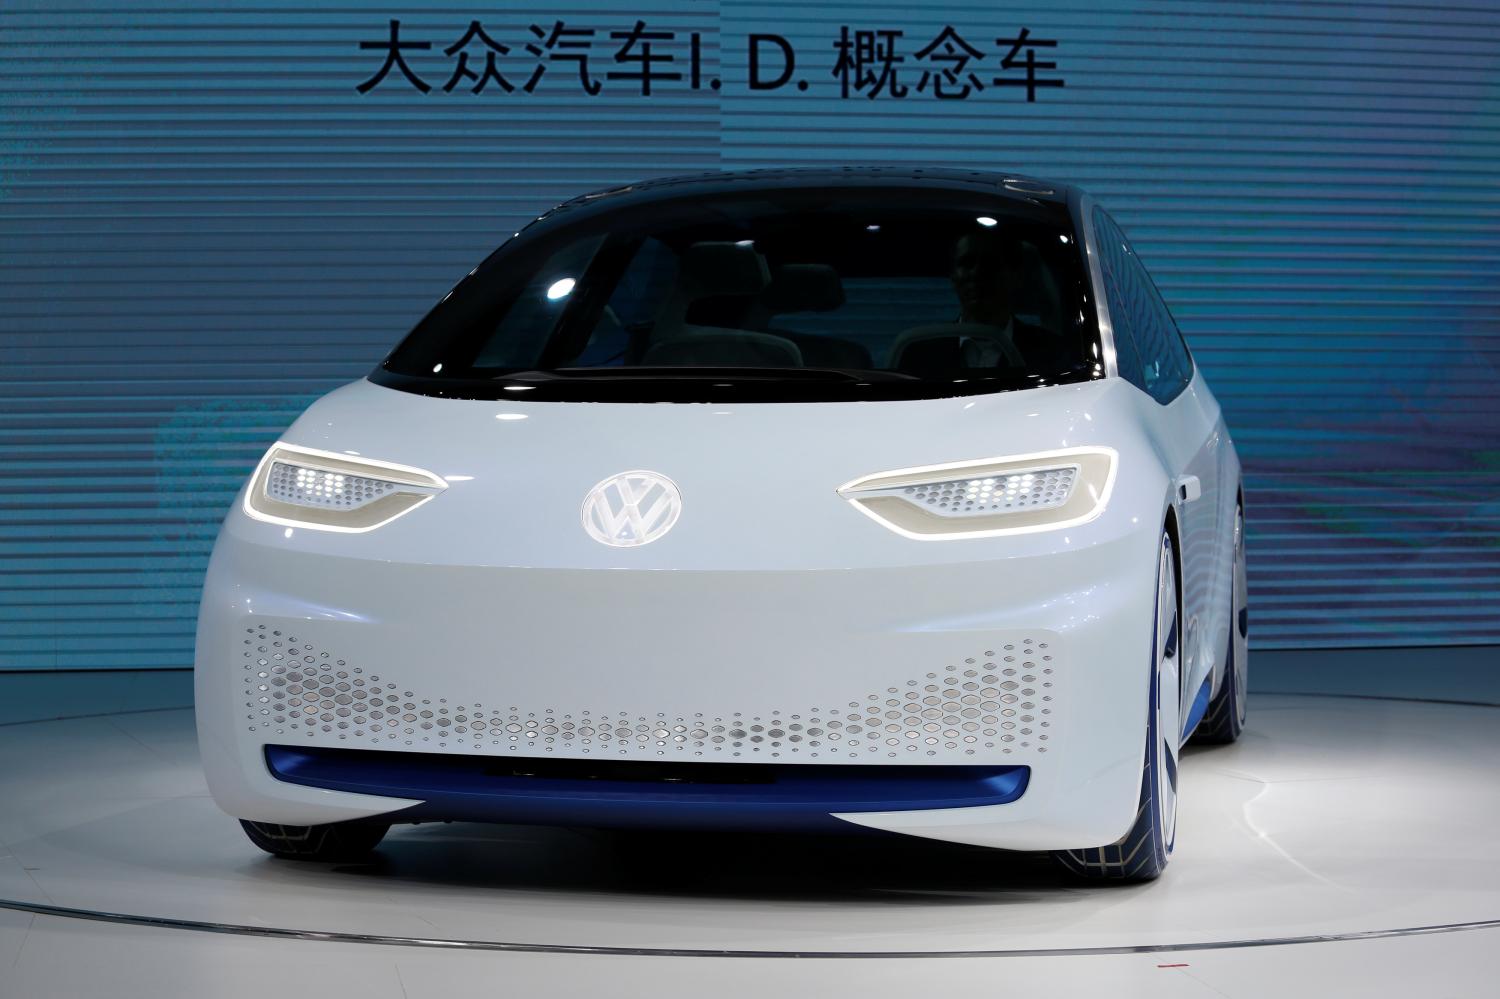 A Volkswagen I.D. electric vehicle is shown at a news conference in Guangzhou, China November 17, 2016.      REUTERS/Bobby Yip - D1BEUNIGXQAA